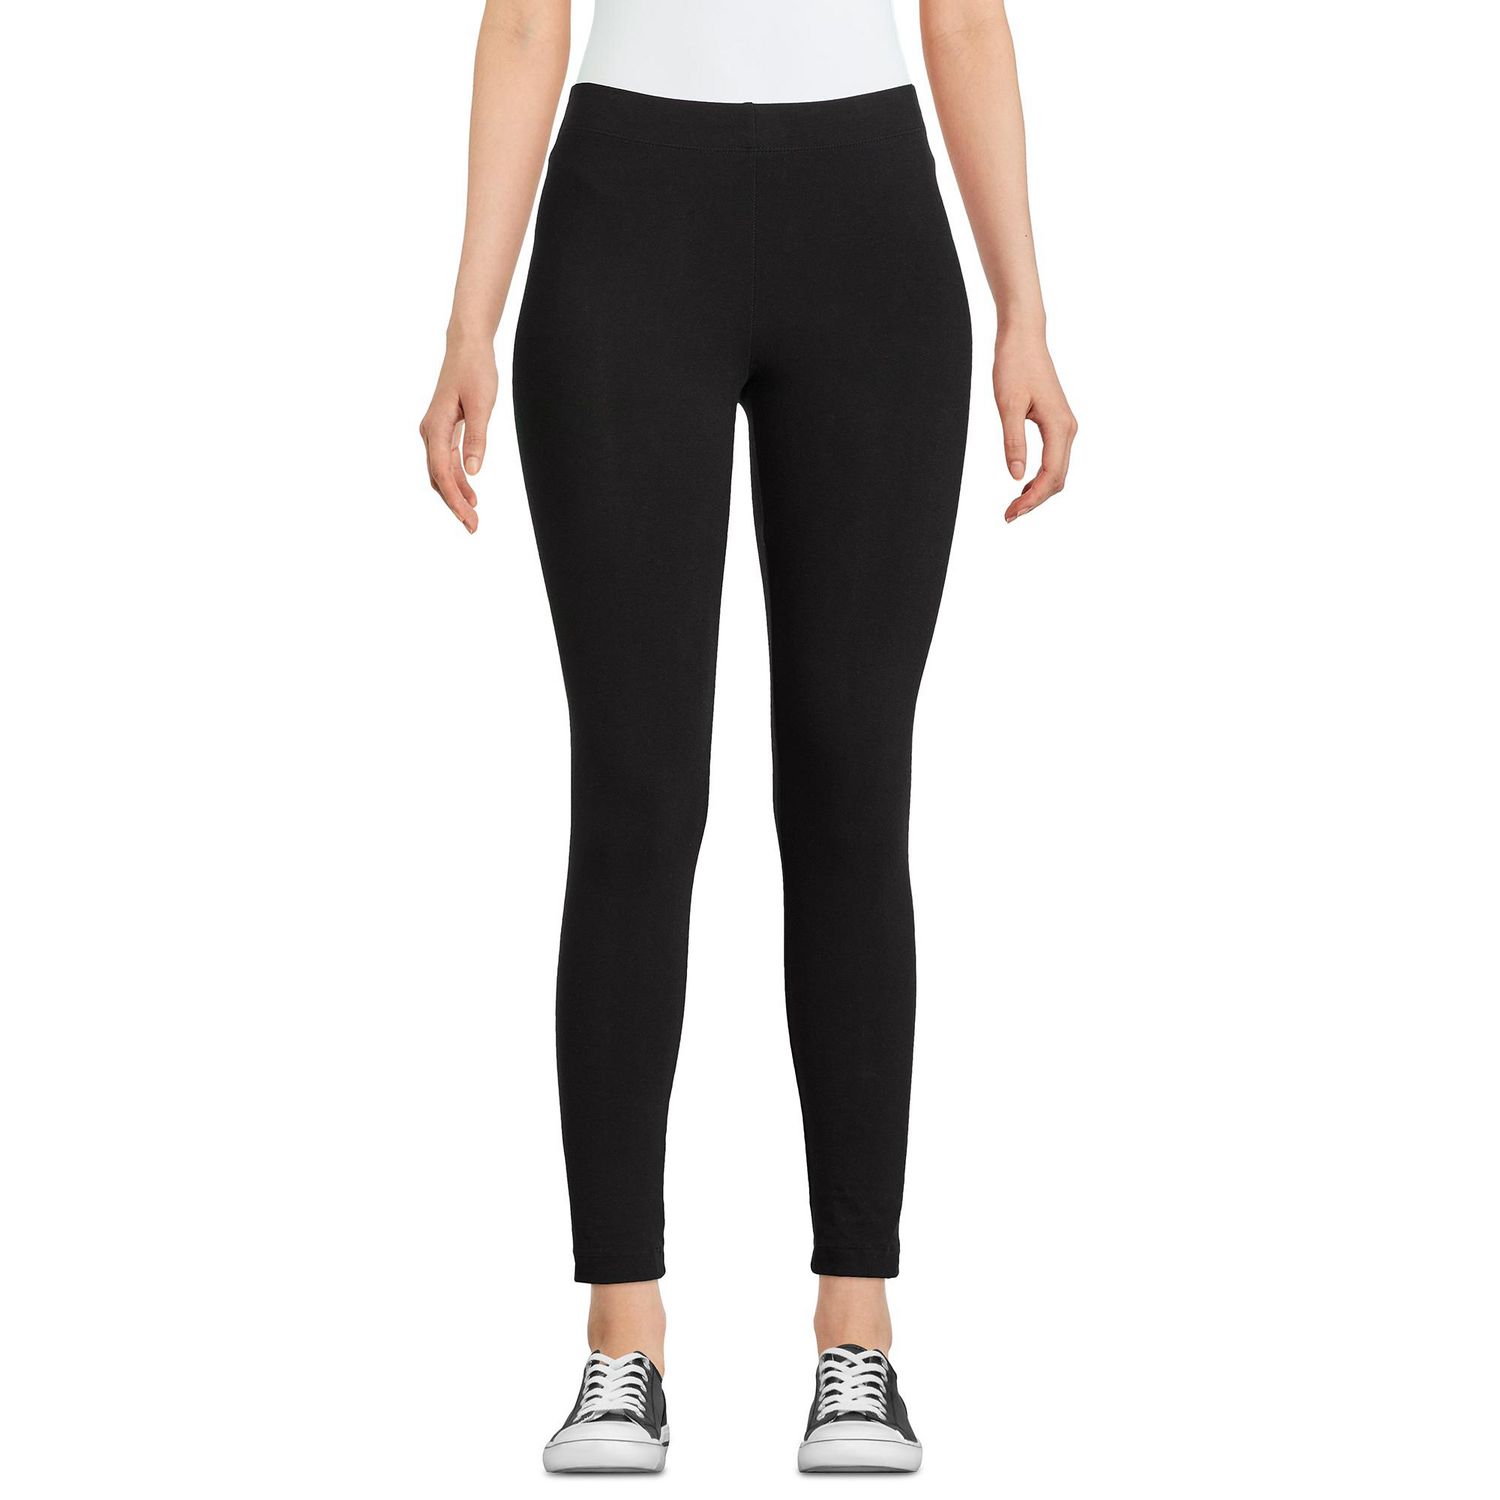 LEEMIIJUU Plus Size XXL Womens Tiktok Yoga Pants High Waist Push Up Leggings  For Gym, Exercise, Fitness, Running, And Athletic Trousers From Pandae,  $23.38 | DHgate.Com